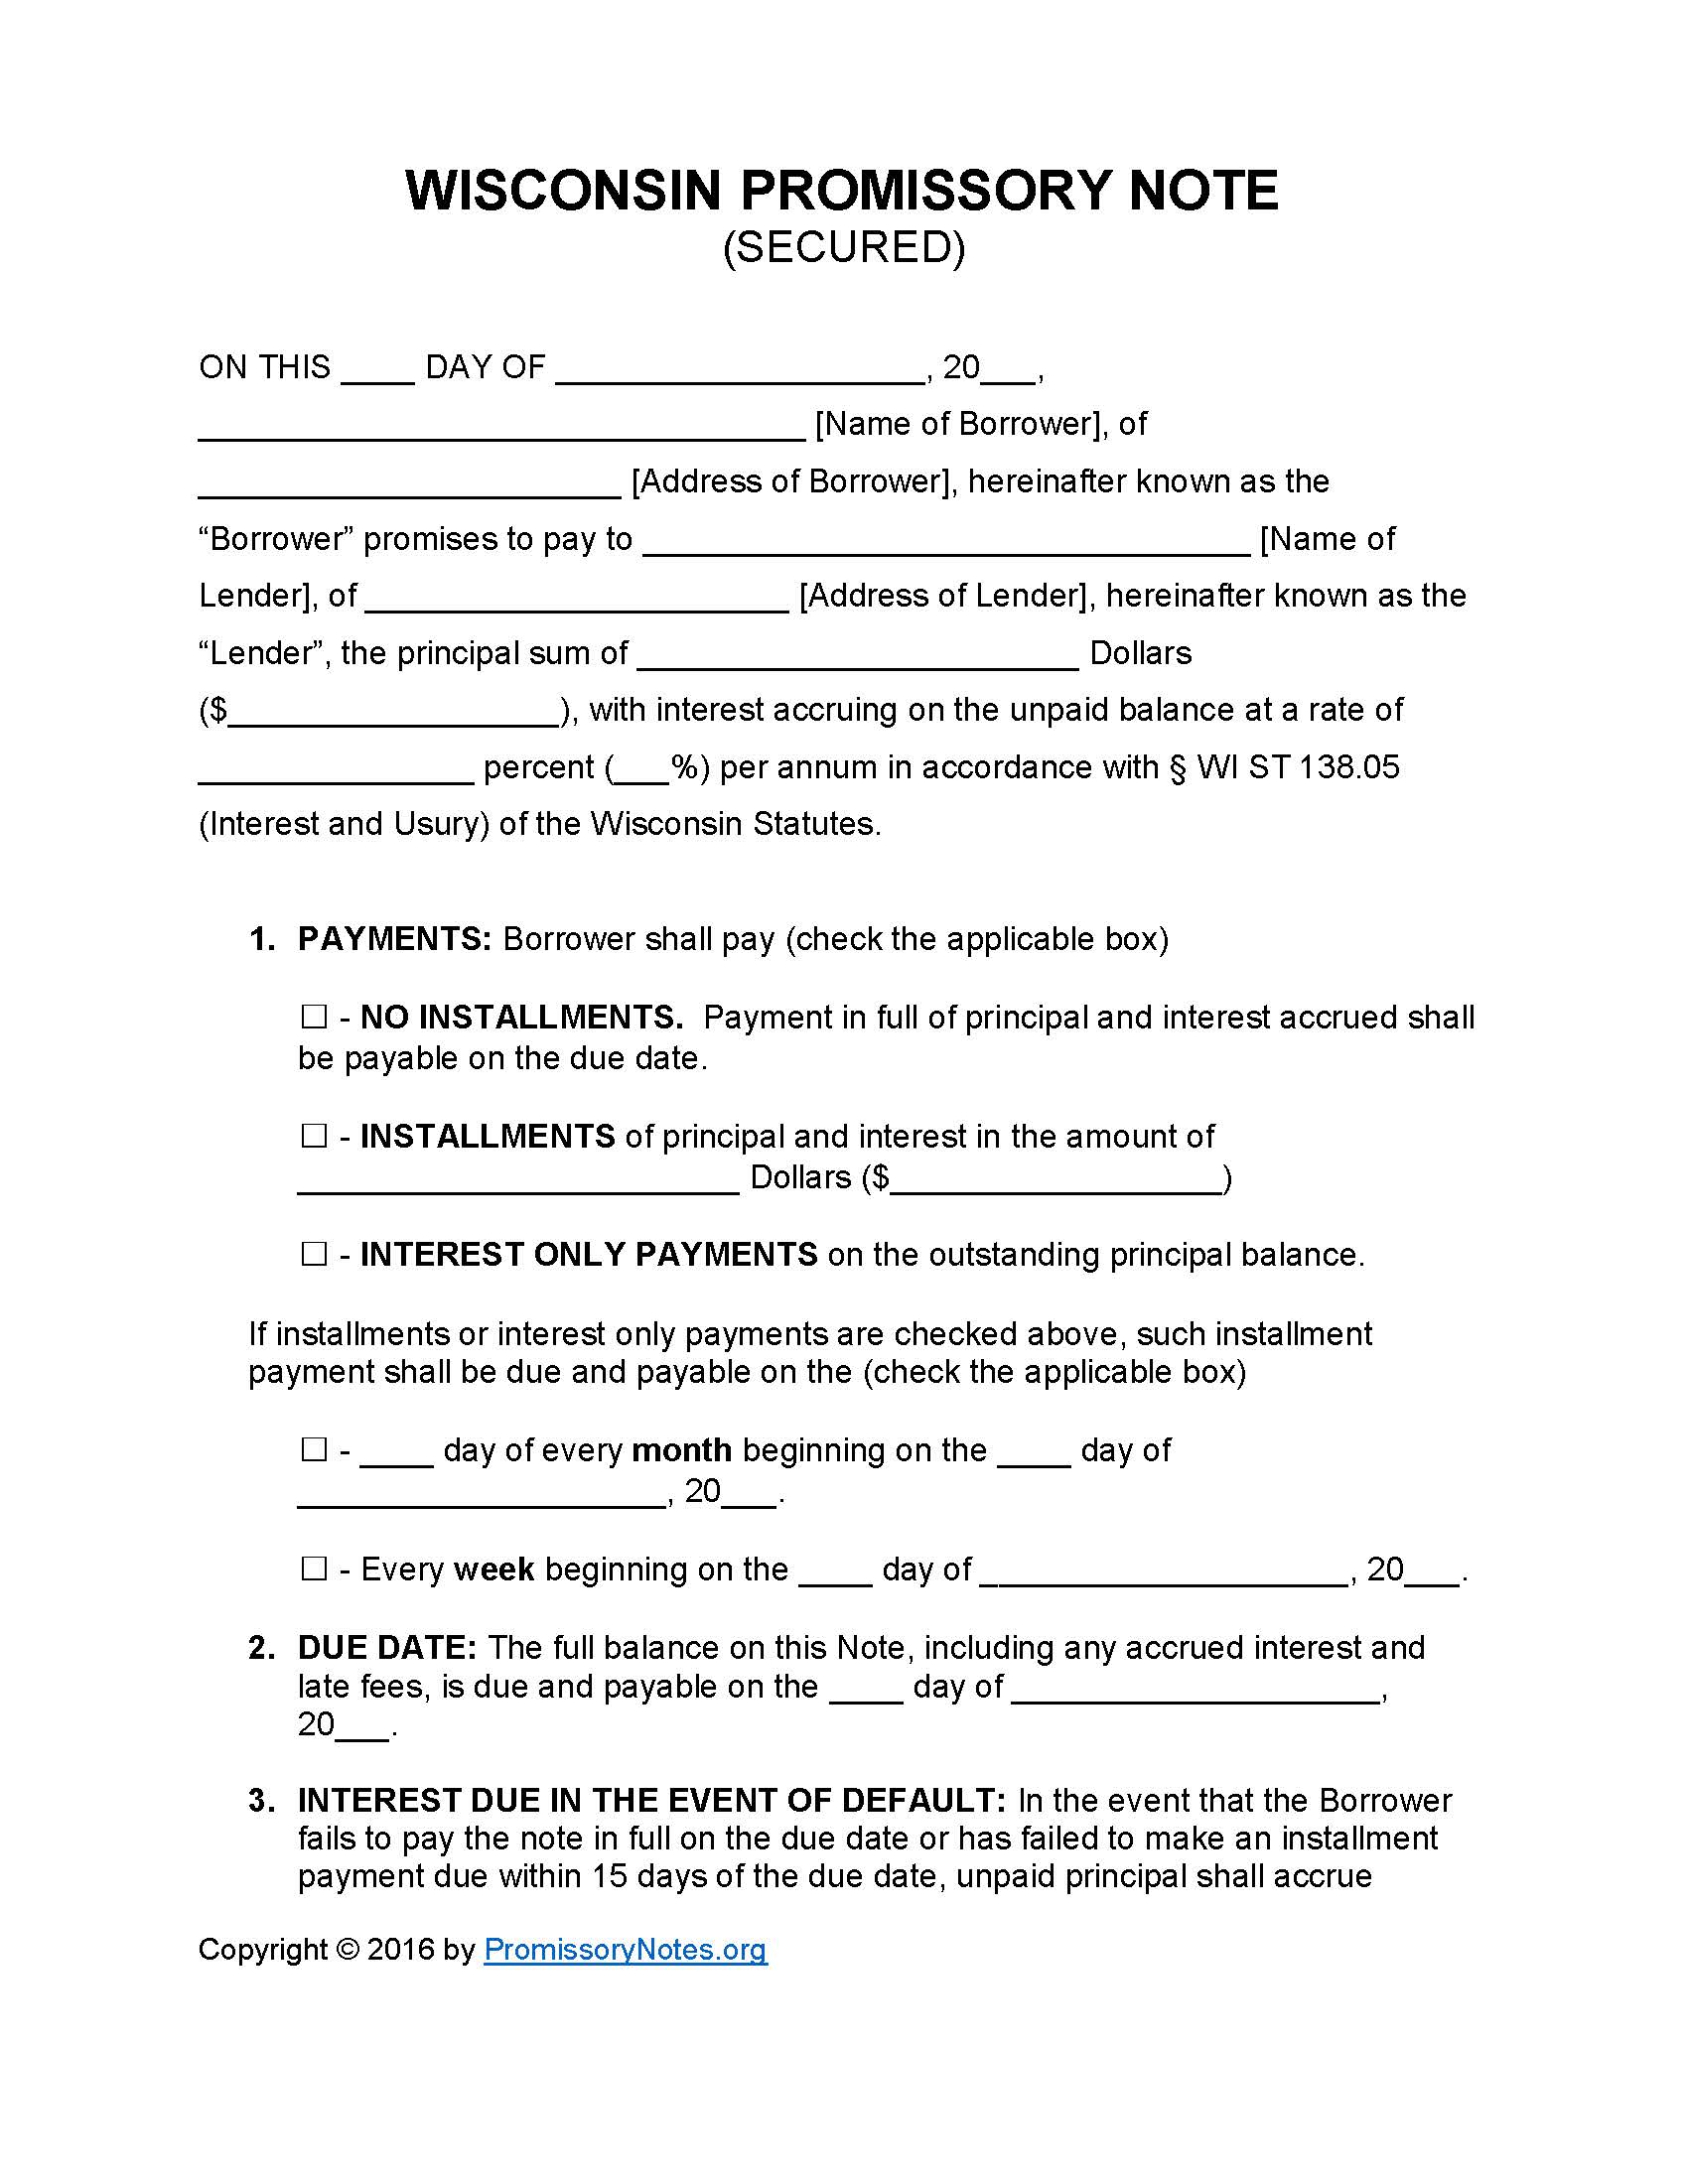 wisconsin-secured-promissory-note-form